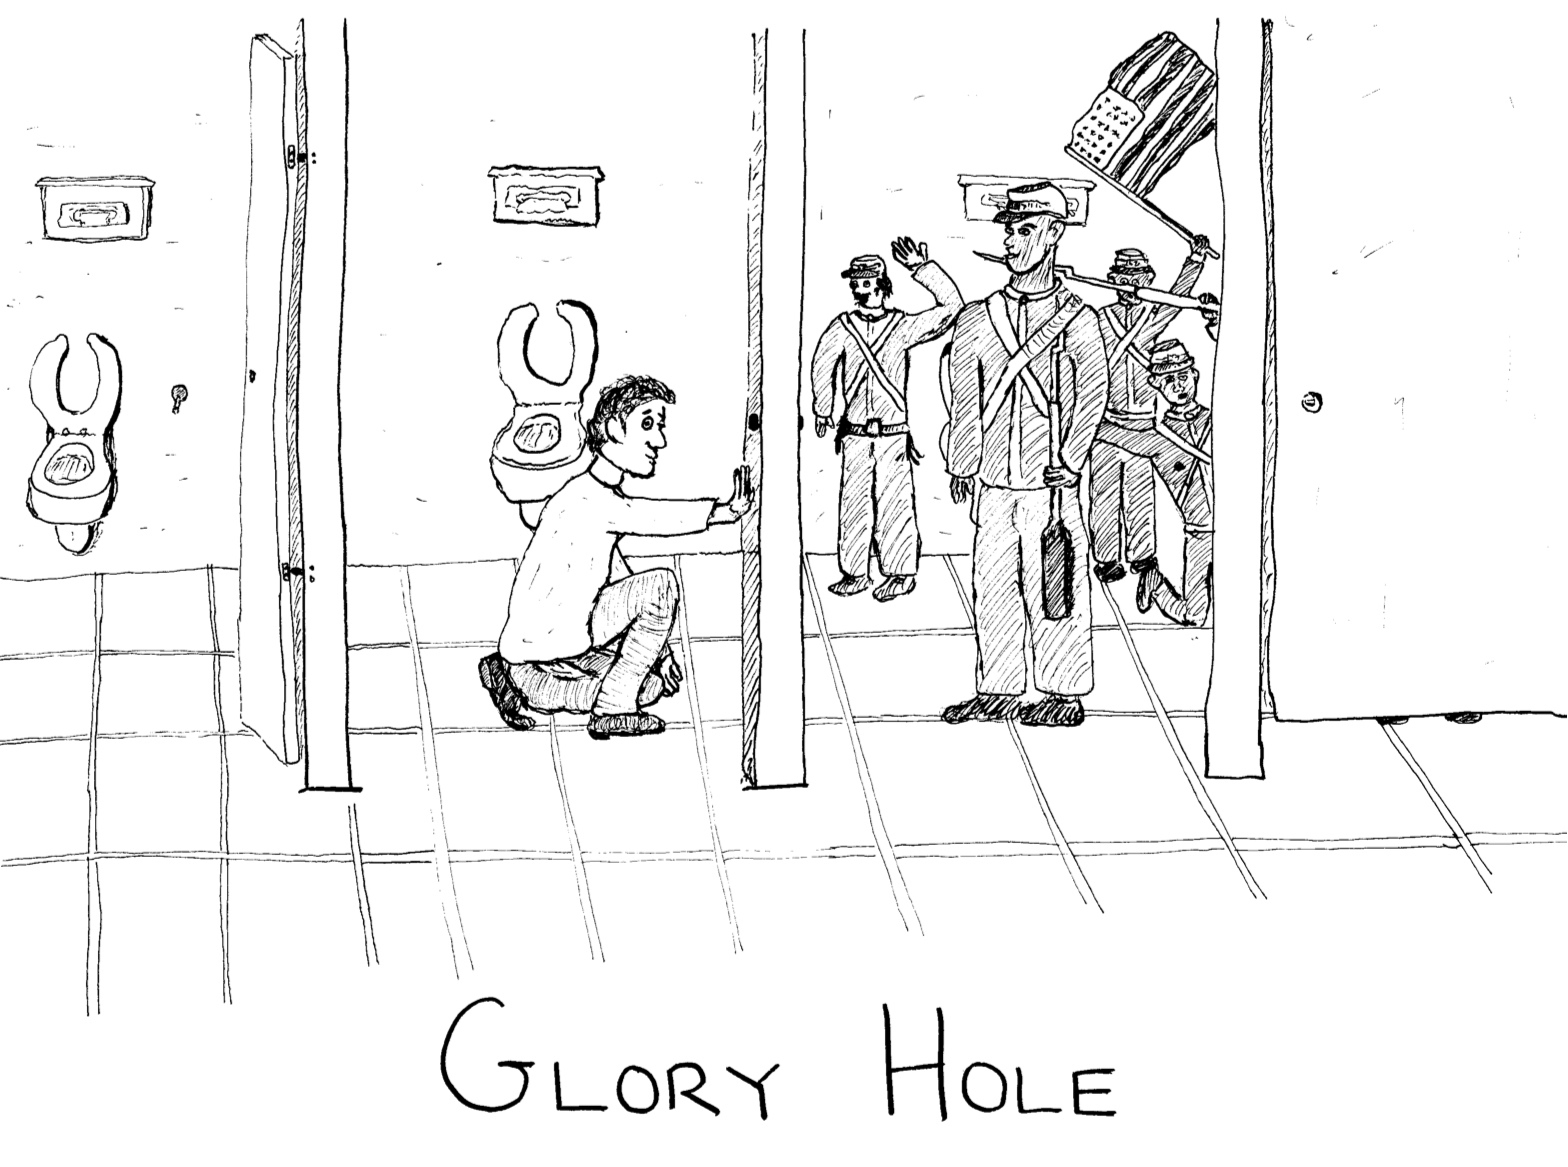 What type of person installs glory holes in restroom partitions?